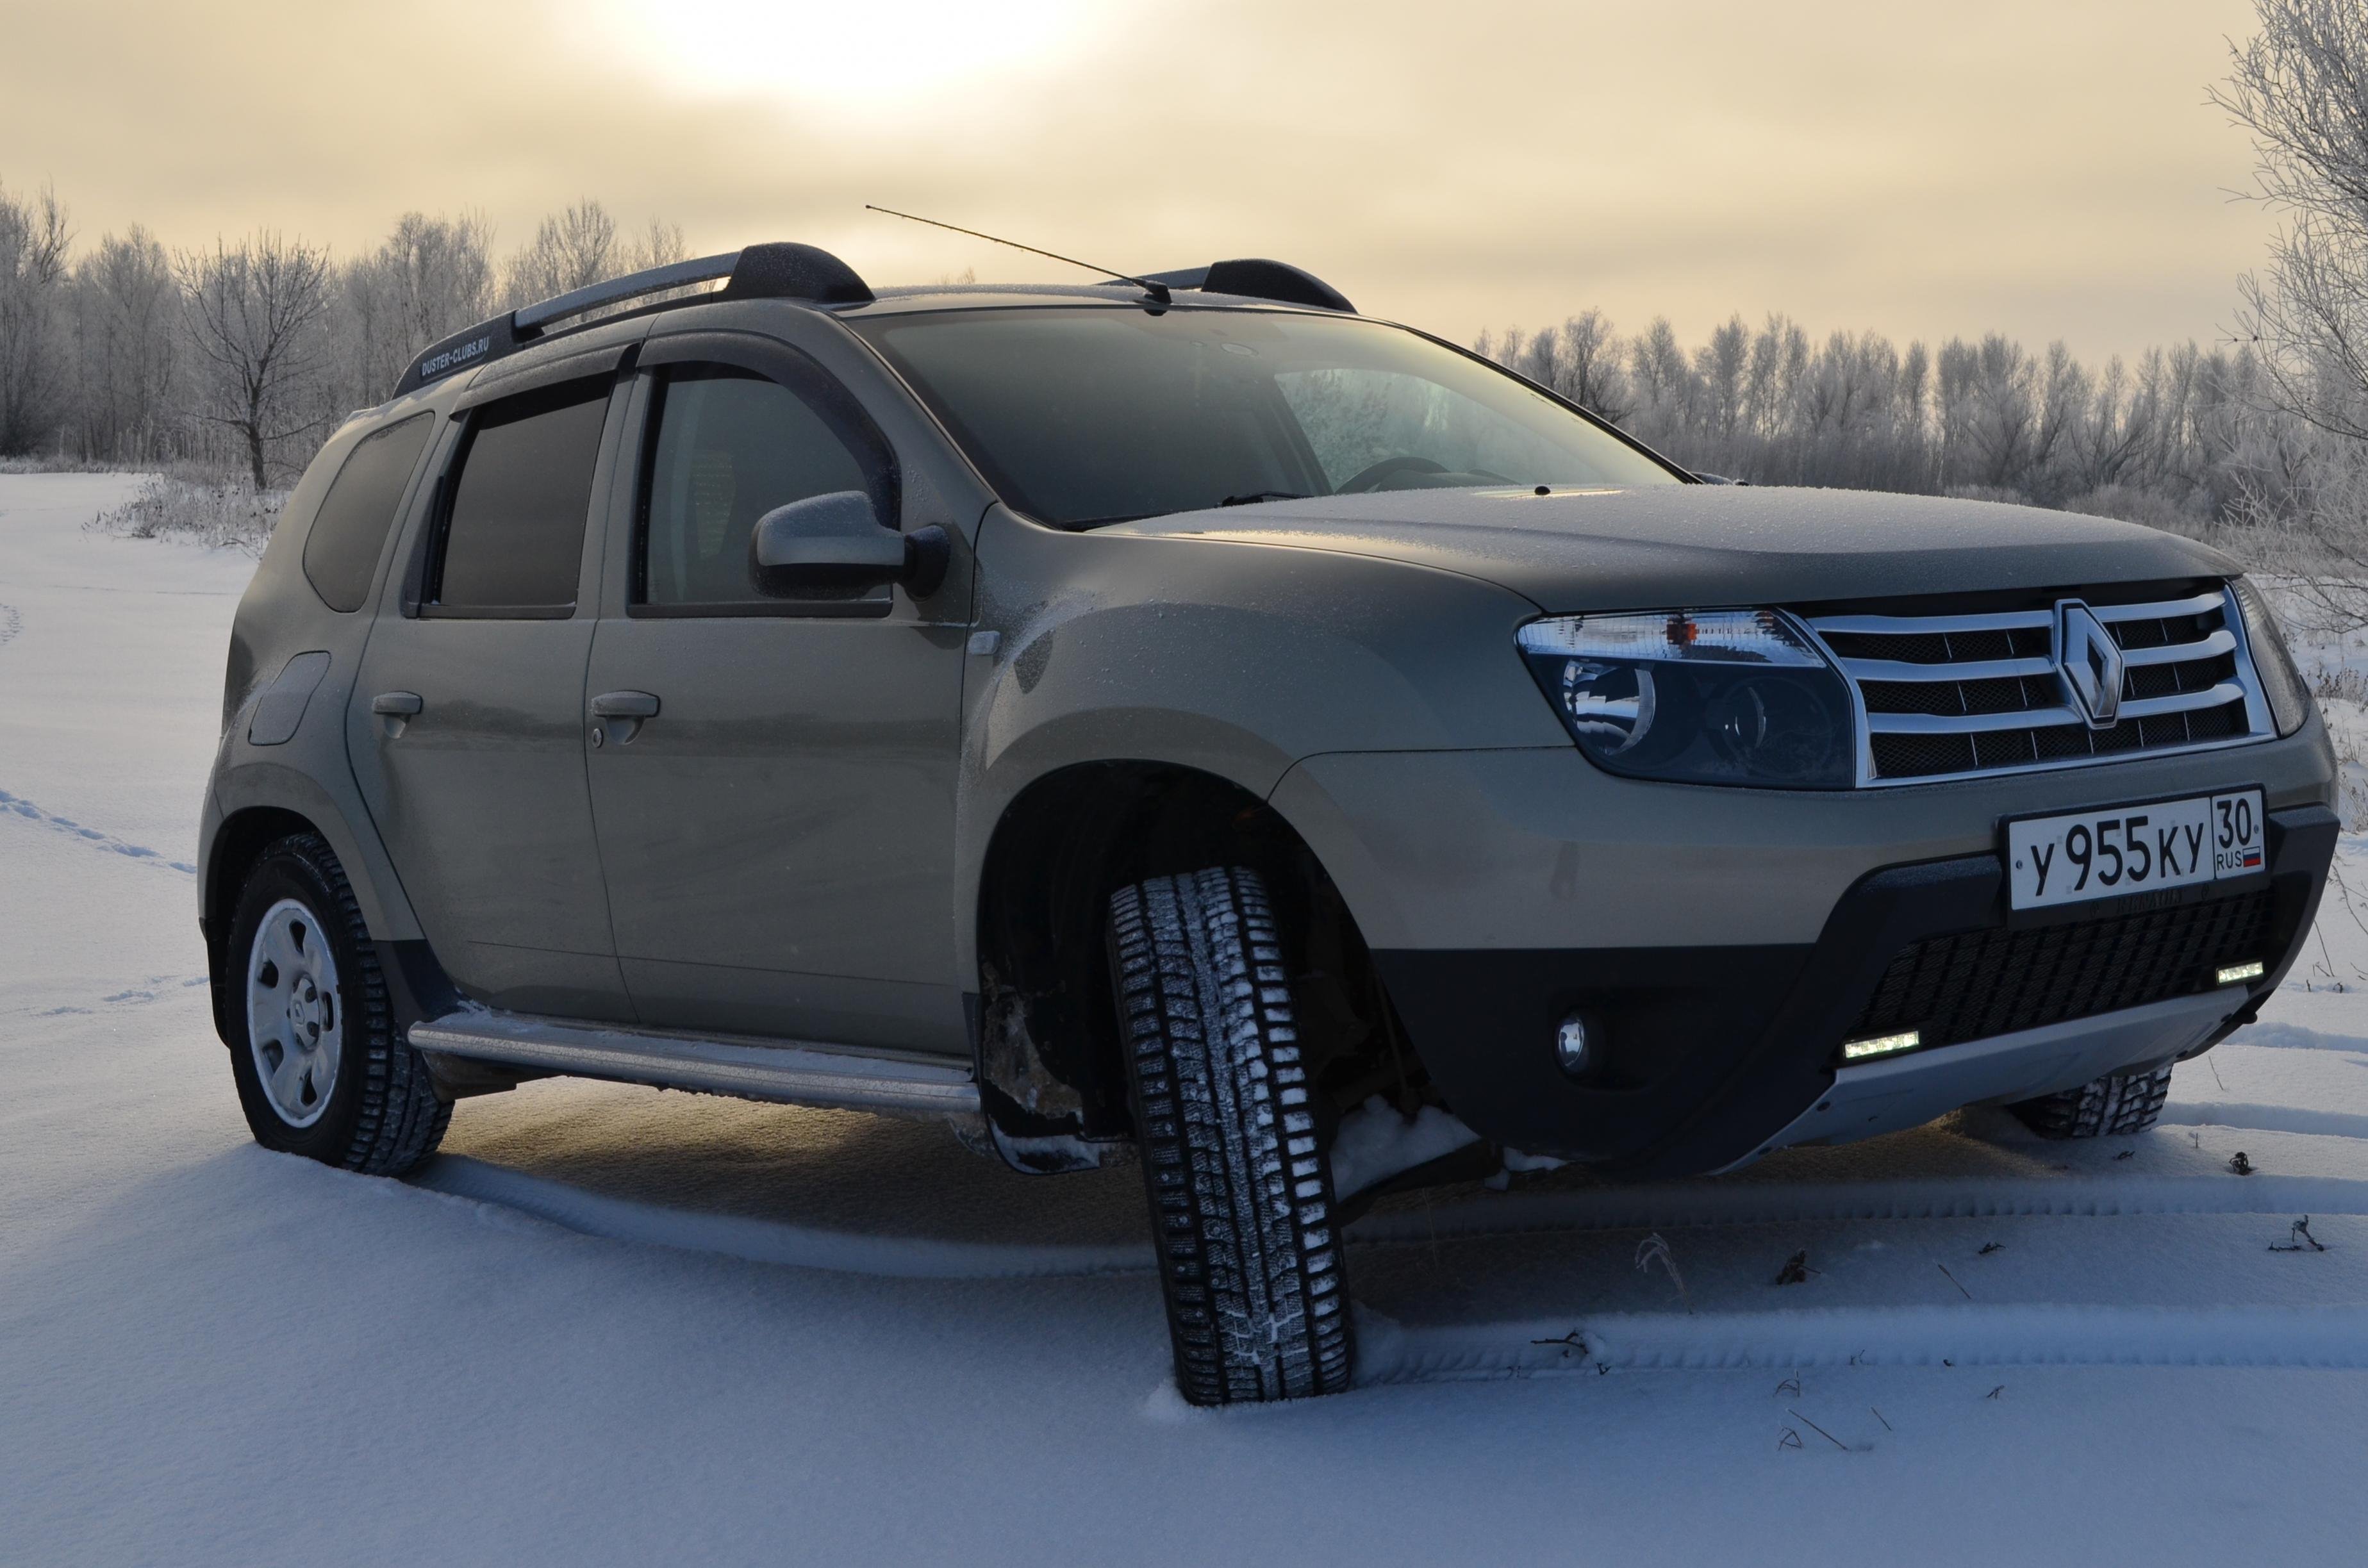 Форум рено дастер 2.0. Рено Дастер 2. Renault Duster 2009. Рено Дастер 2005. Renault Duster 4wd.